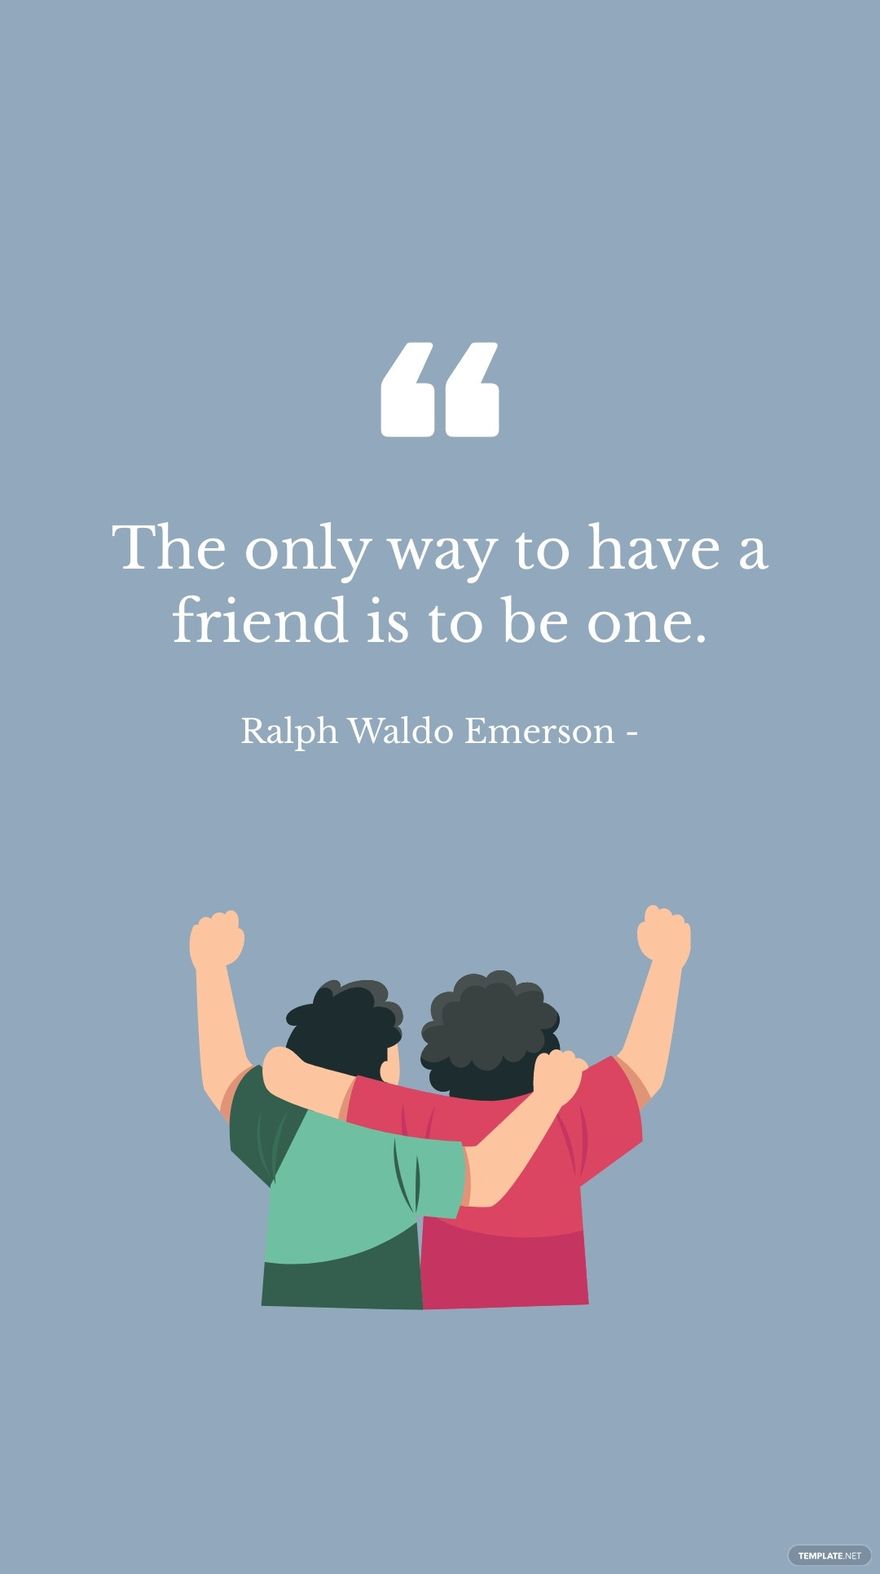 Ralph Waldo Emerson - The only way to have a friend is to be one.